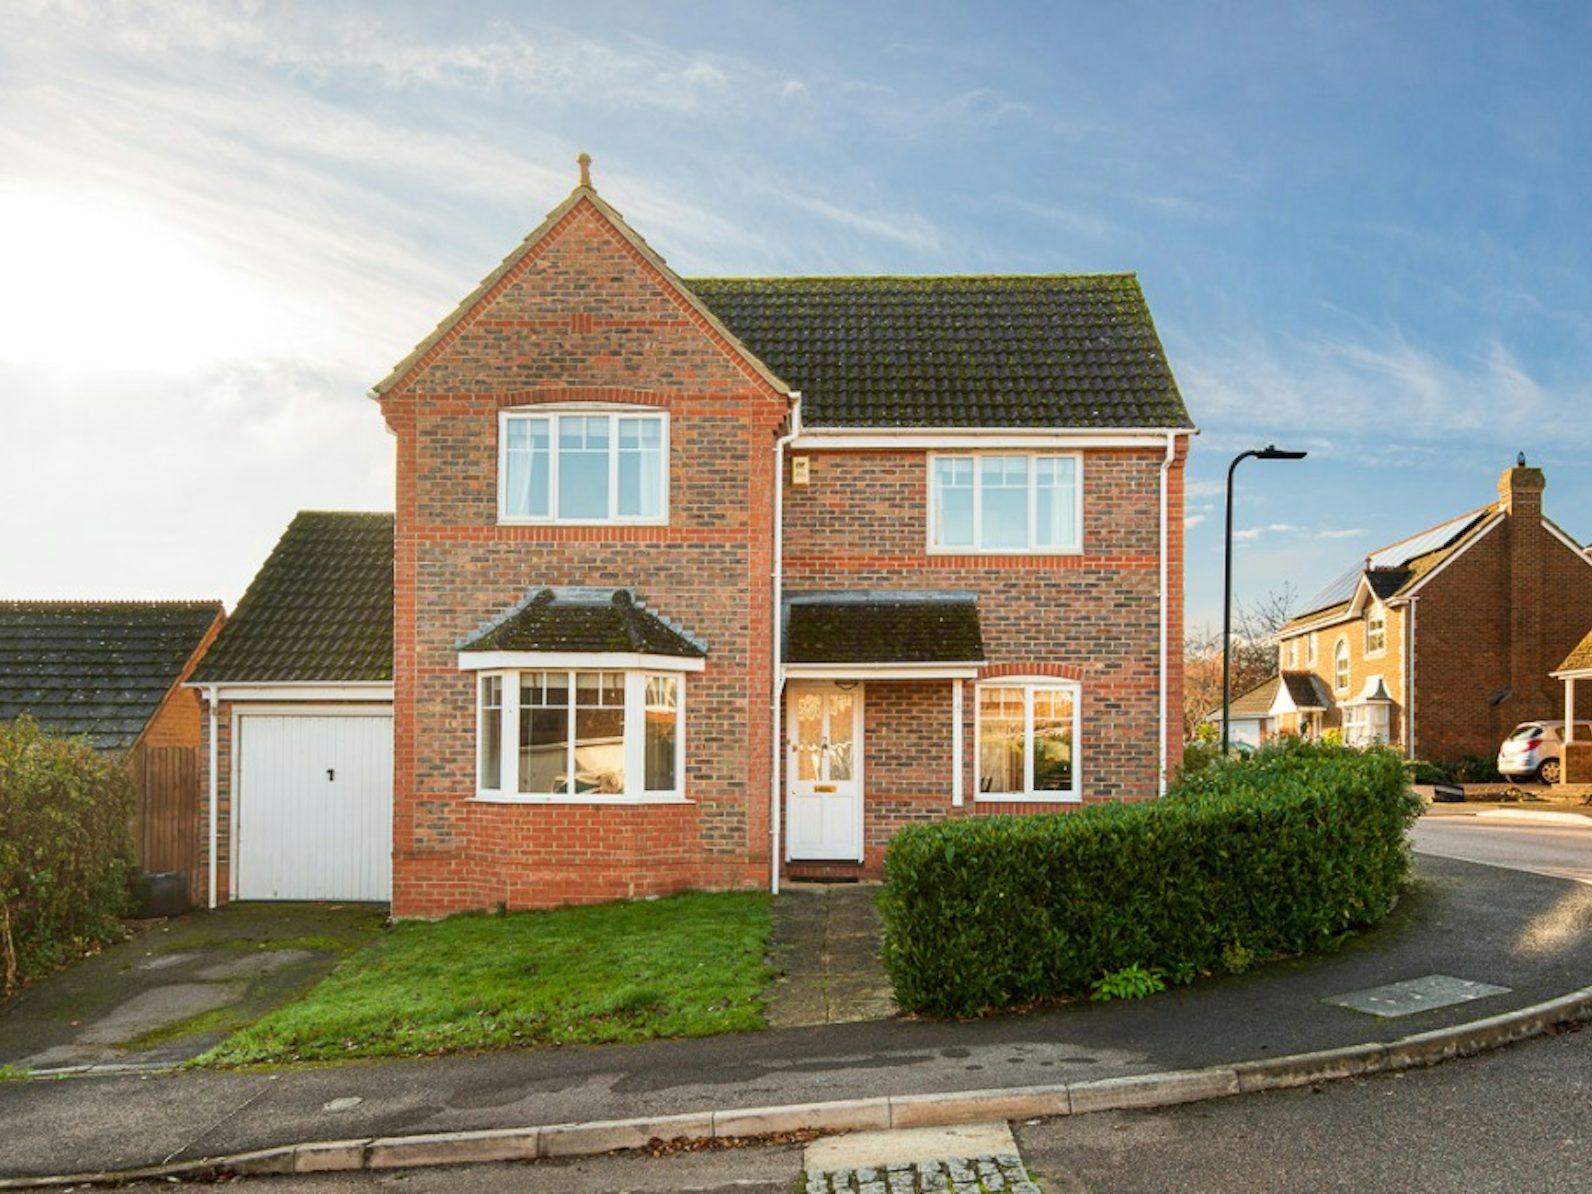 Detached House for sale on Wansey Gardens Newbury, RG14